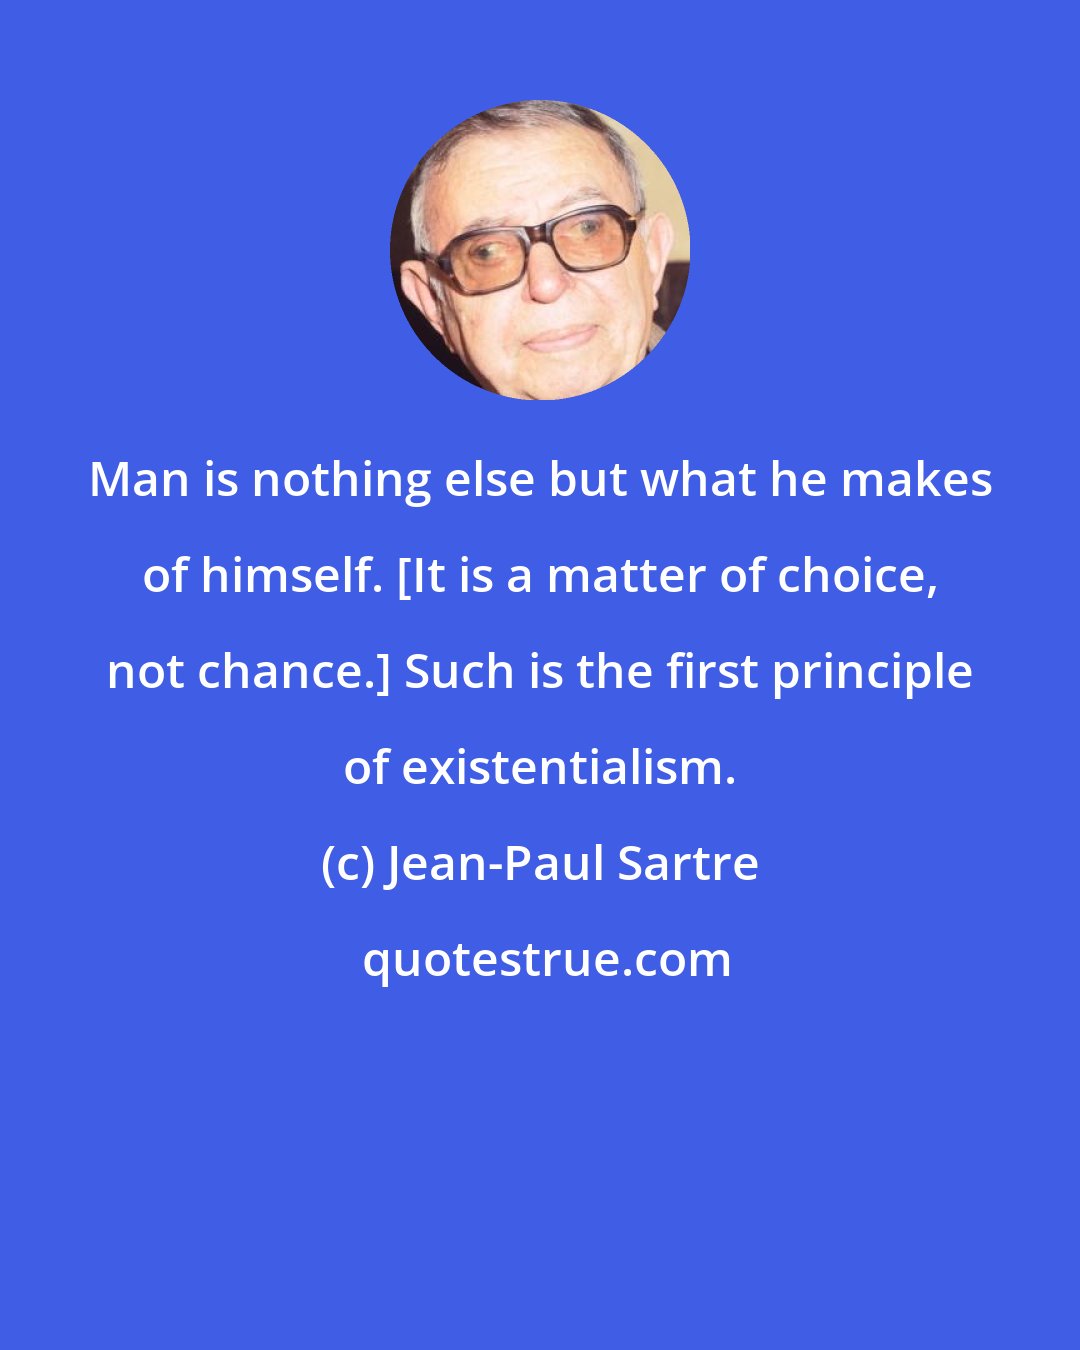 Jean-Paul Sartre: Man is nothing else but what he makes of himself. [It is a matter of choice, not chance.] Such is the first principle of existentialism.